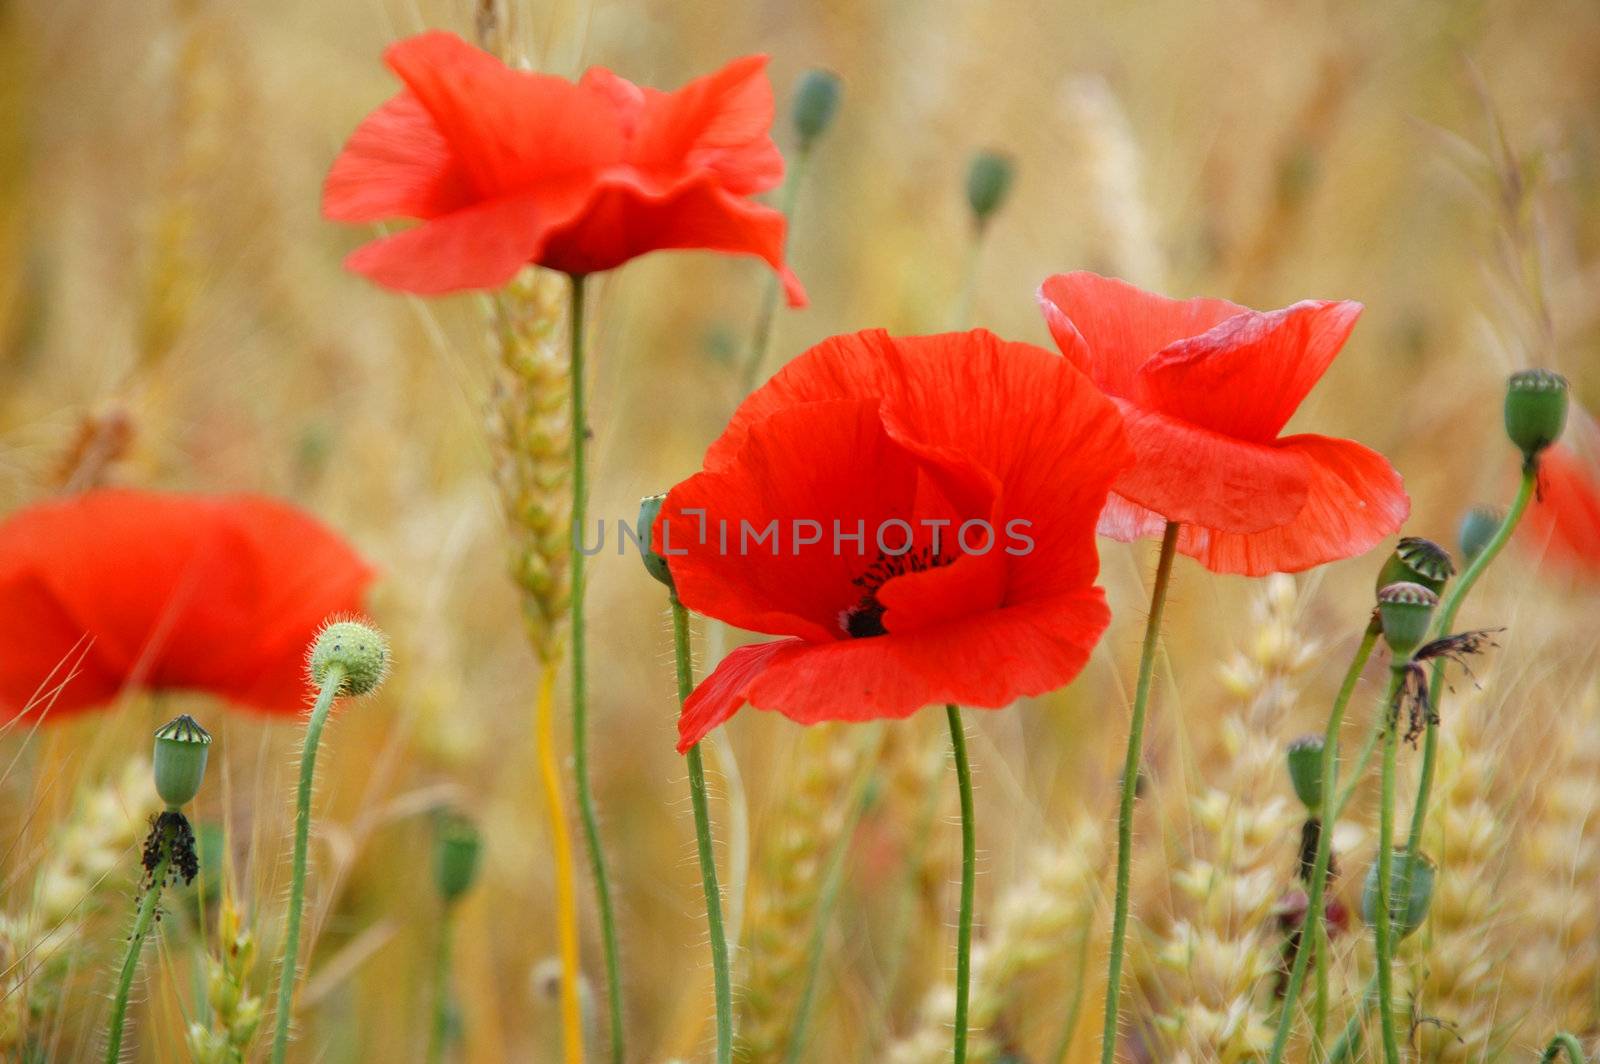 weath and poppies in corrubedo by raalves